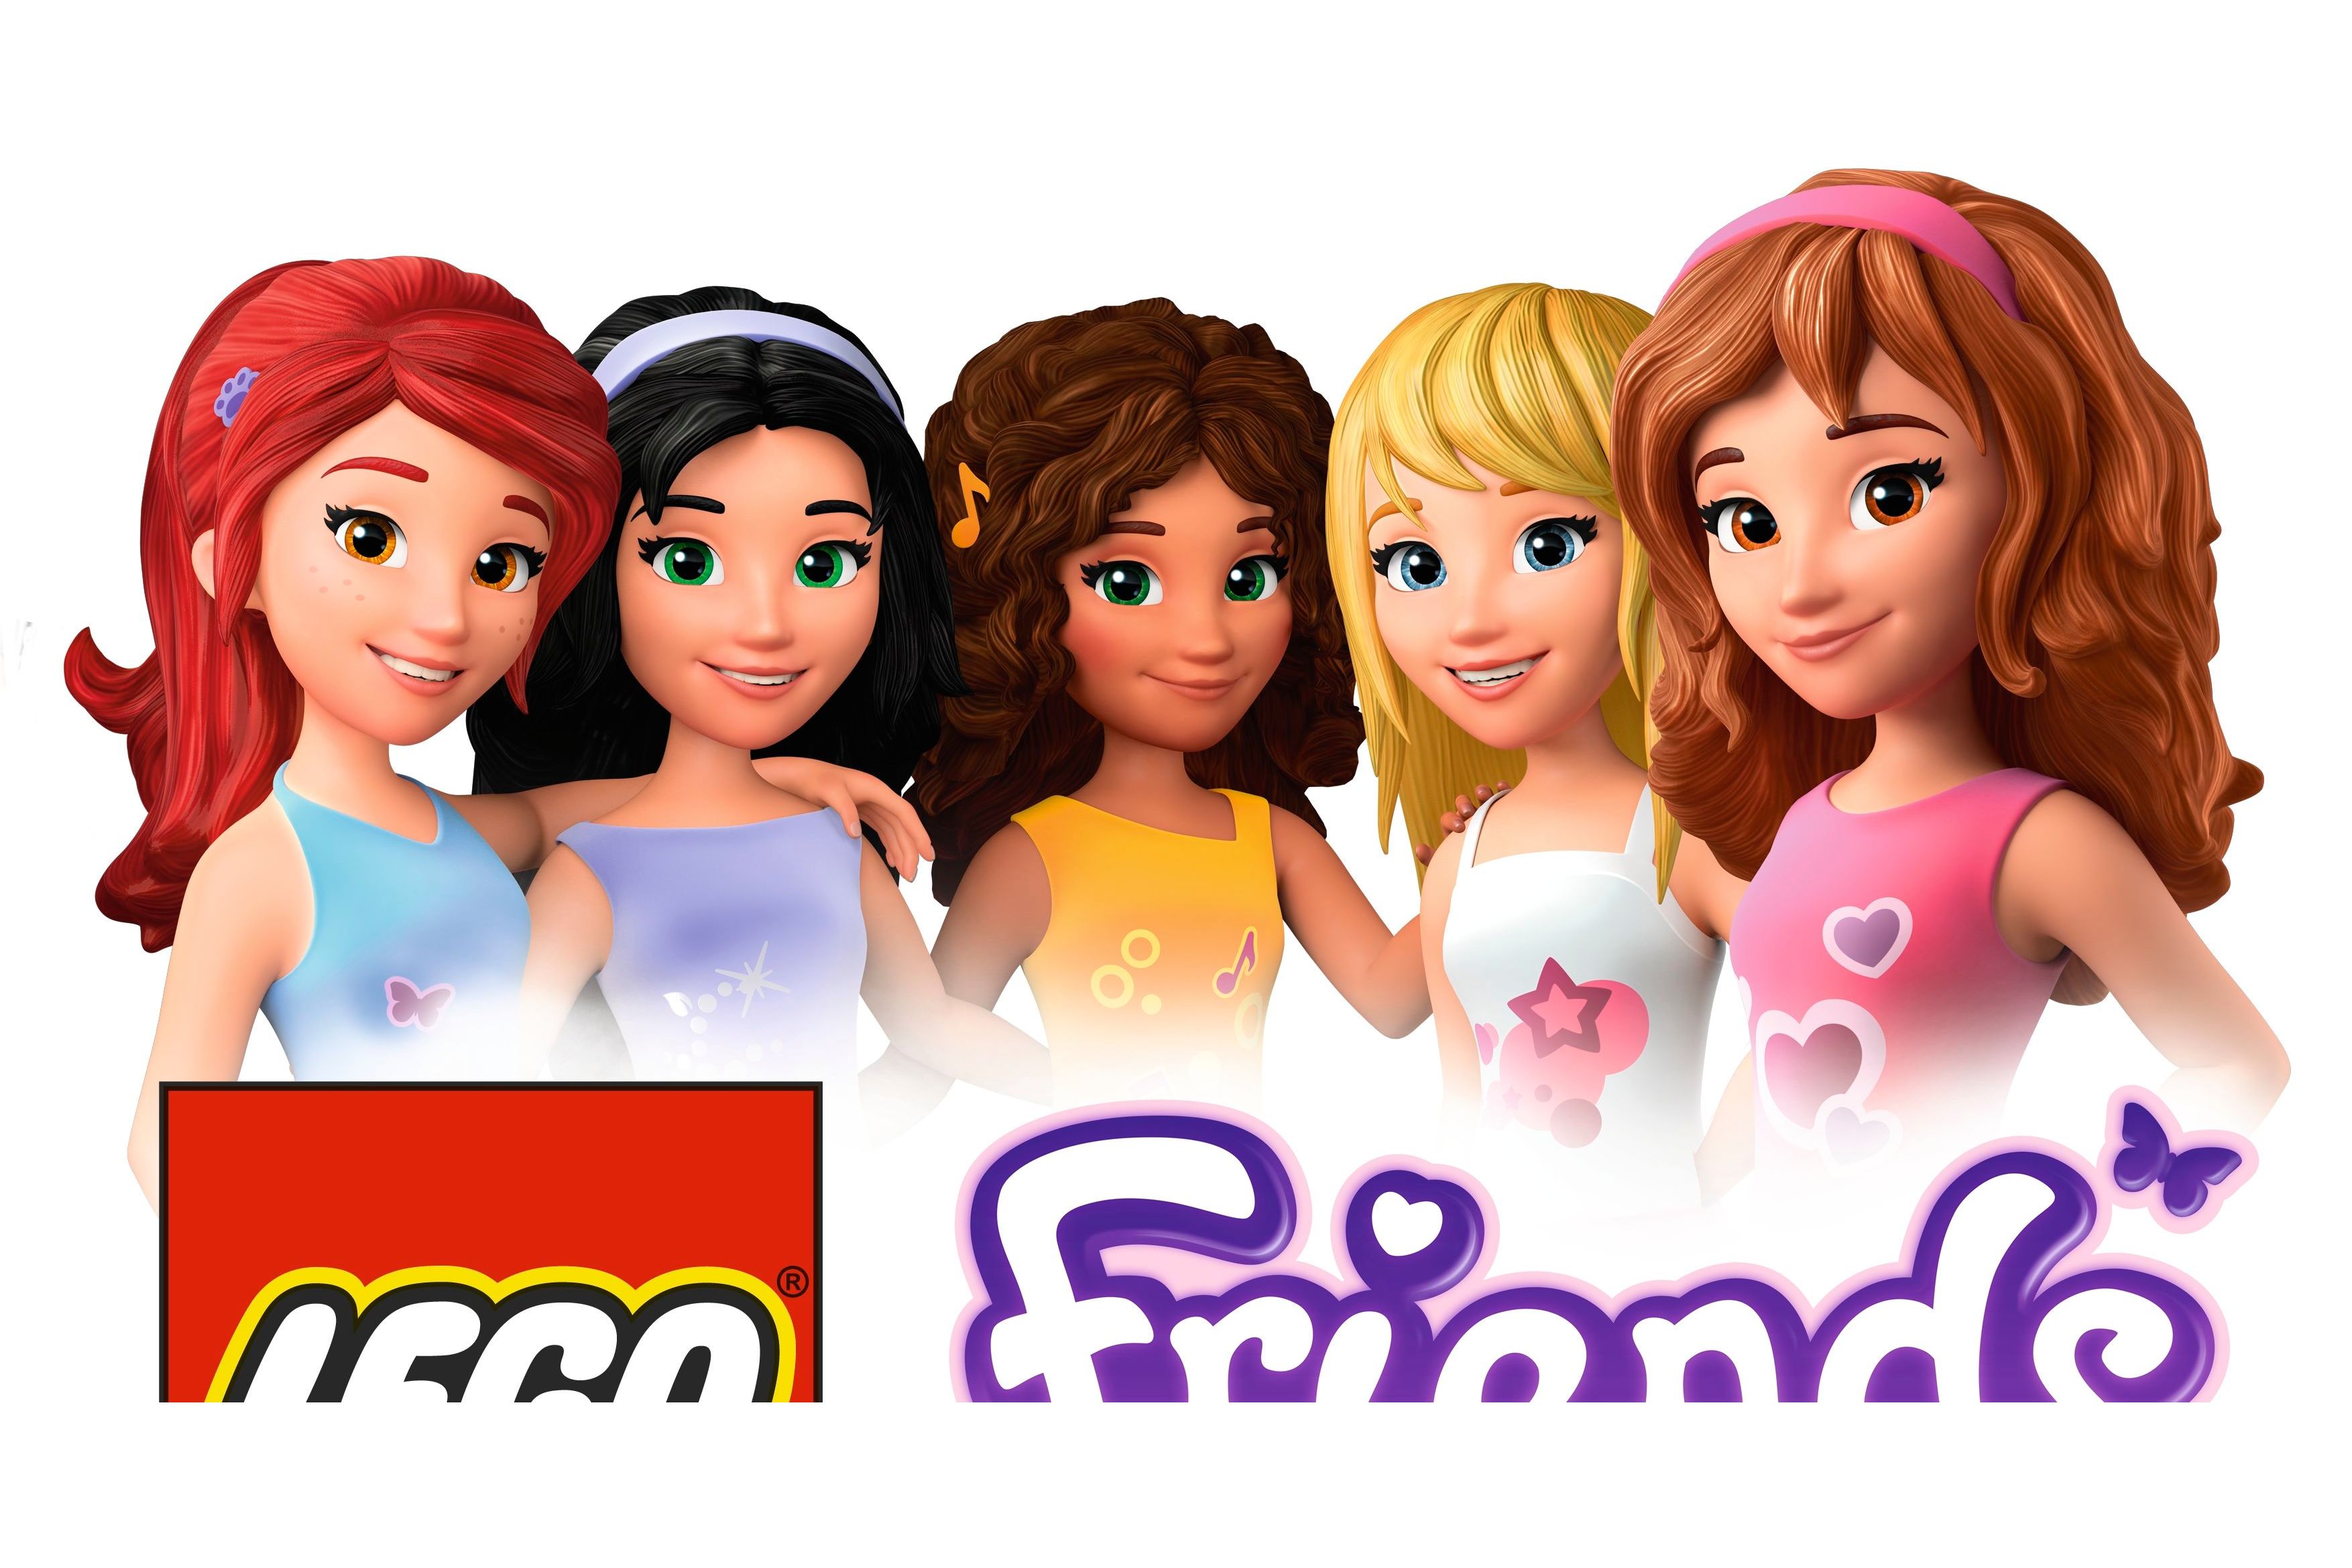 Which LEGO Friends Girl Are You?